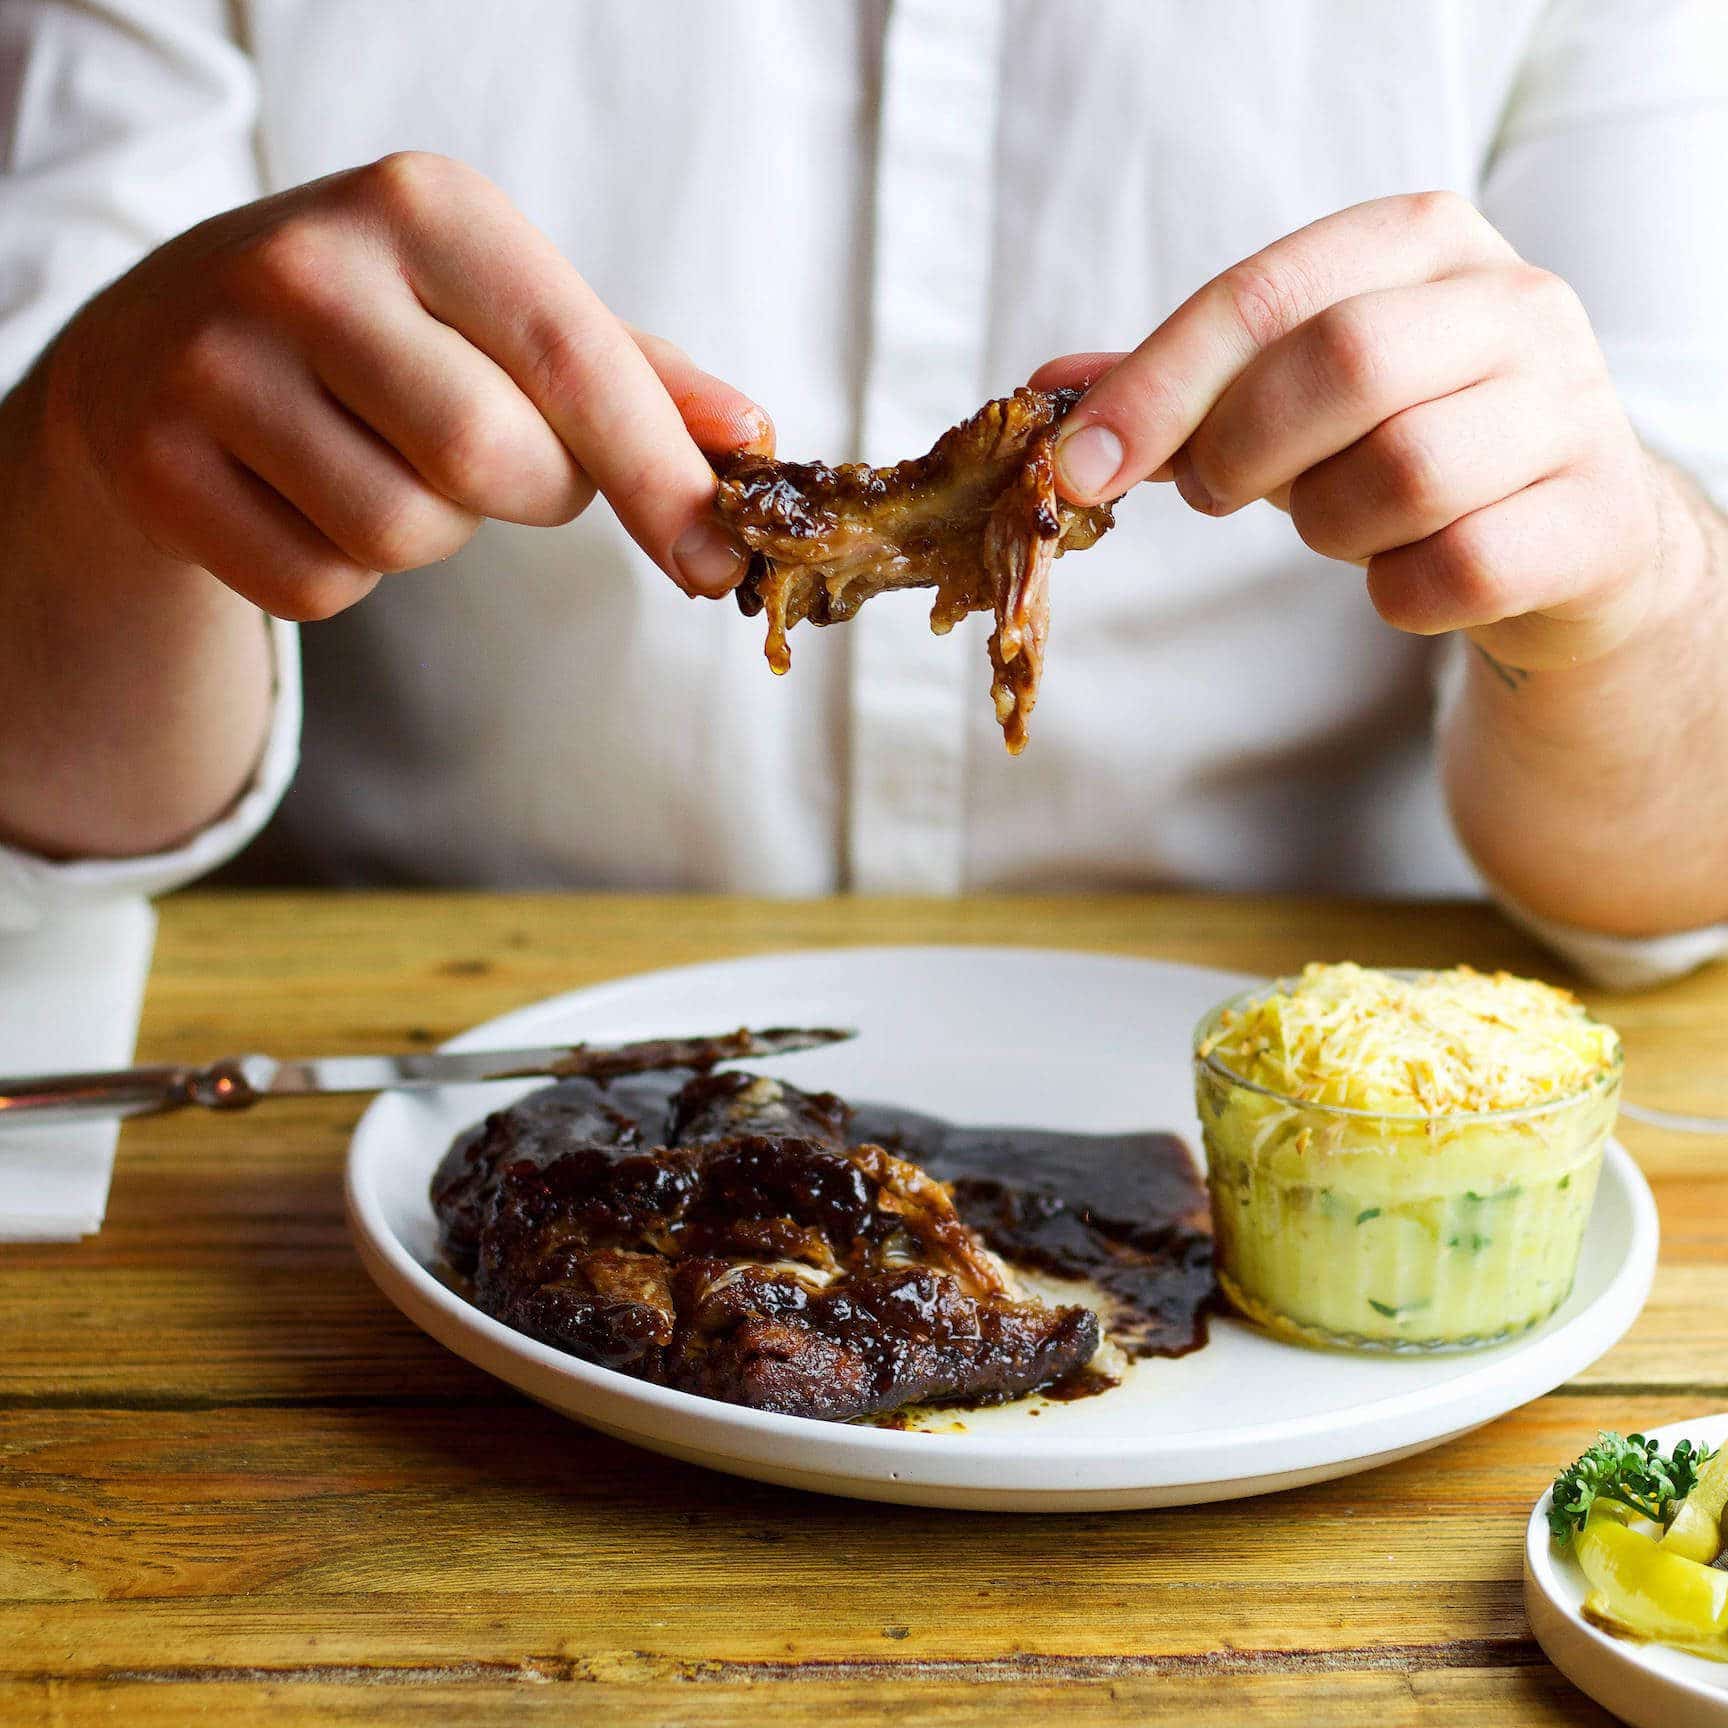 Slow roasted BBQ ribs with creamy sauce and baked mashed potatoes with smoked cheese. You will just lick your fingers. 1